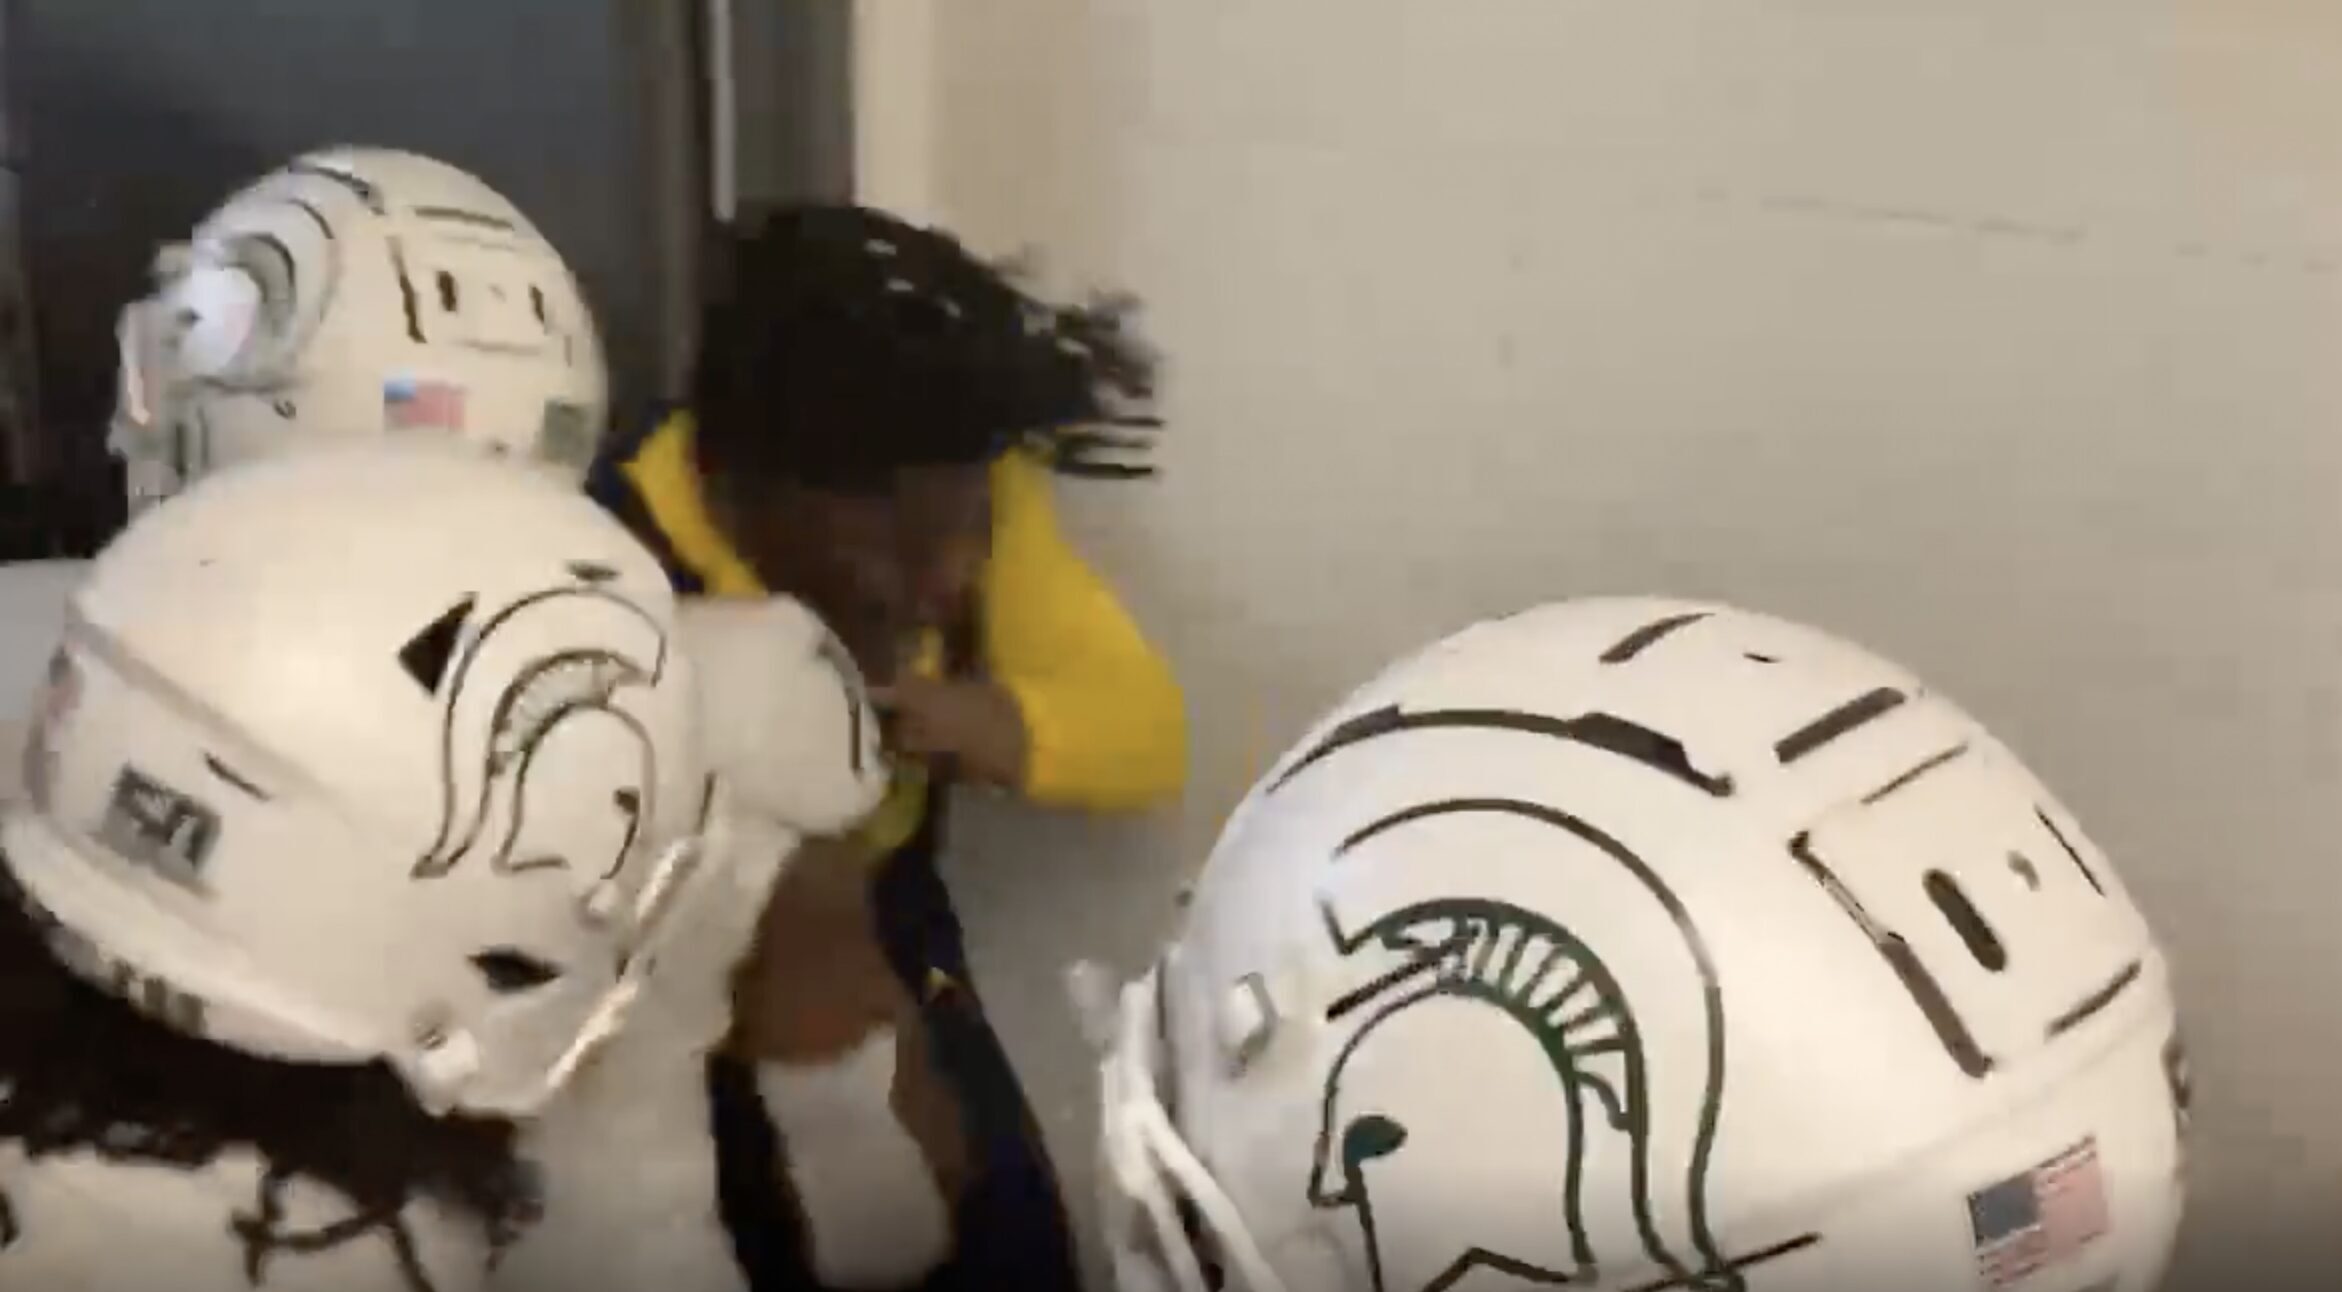 Disturbing Video Shows Group of Michigan State Players Beating Up on a Michigan Player in Tunnel After the Game